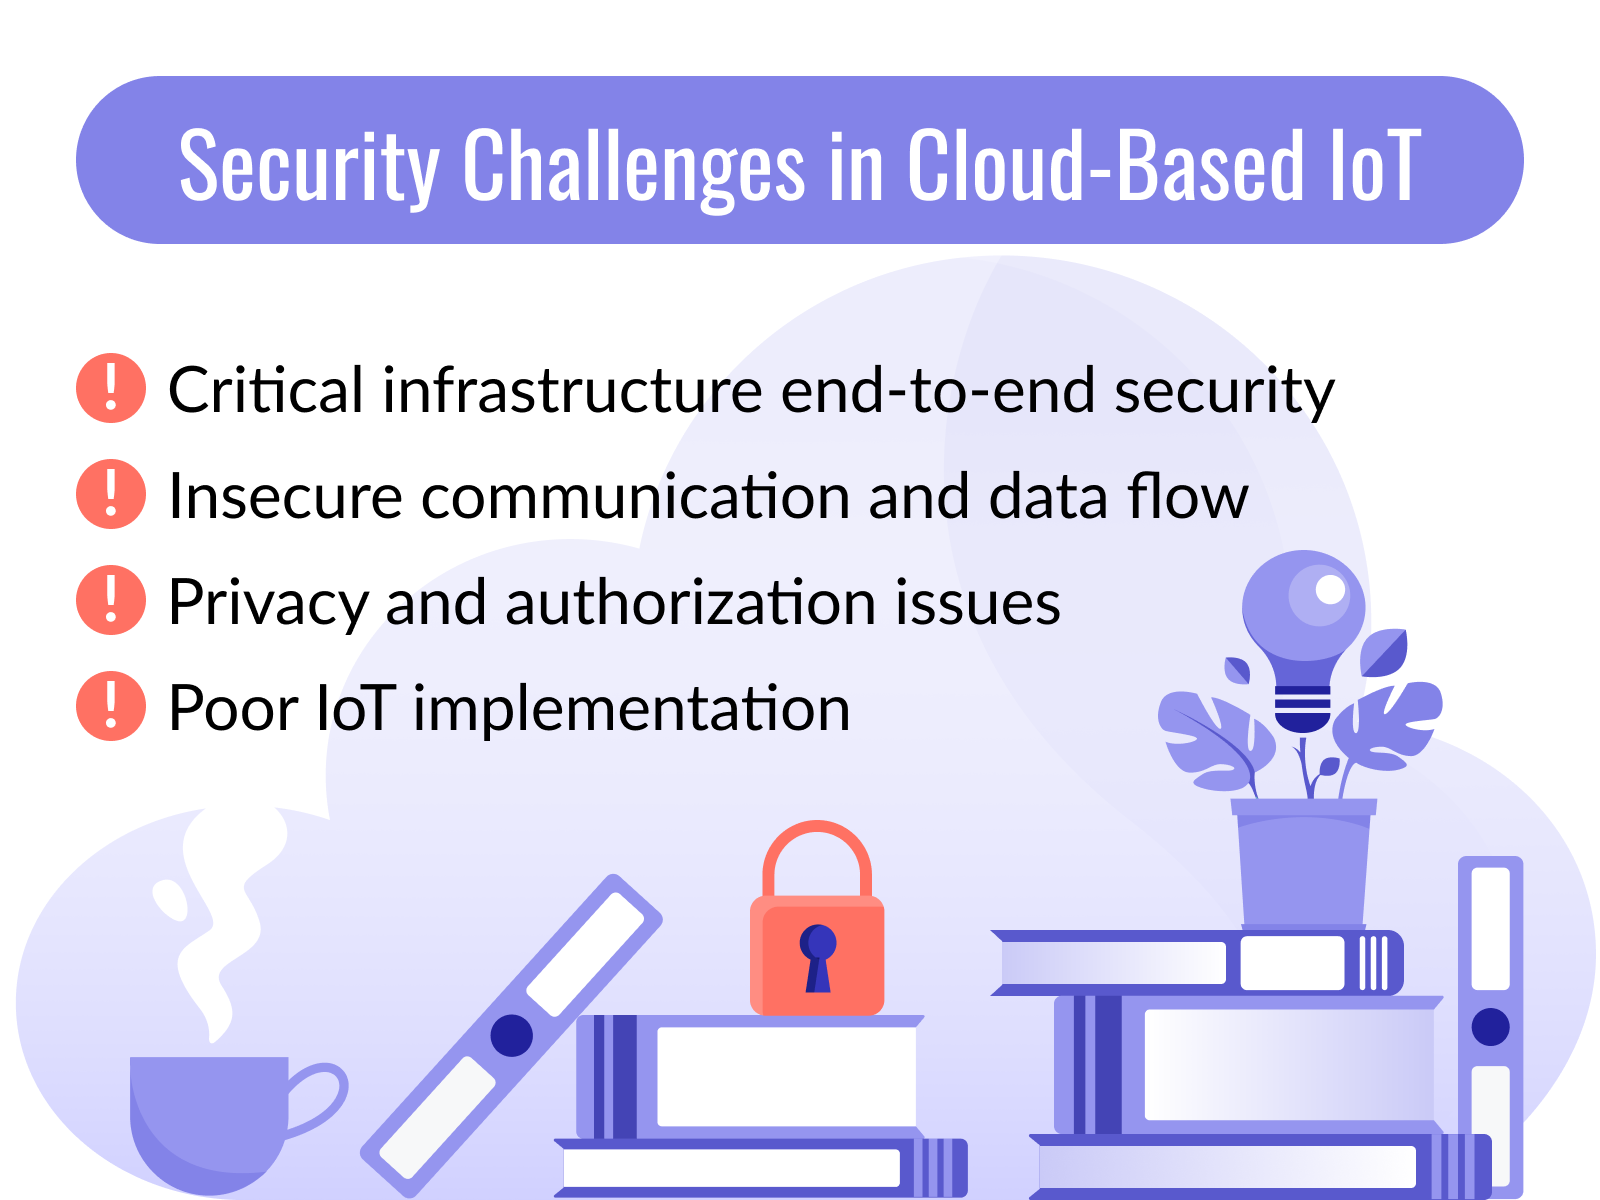 Security challenges in cloud-based IoT